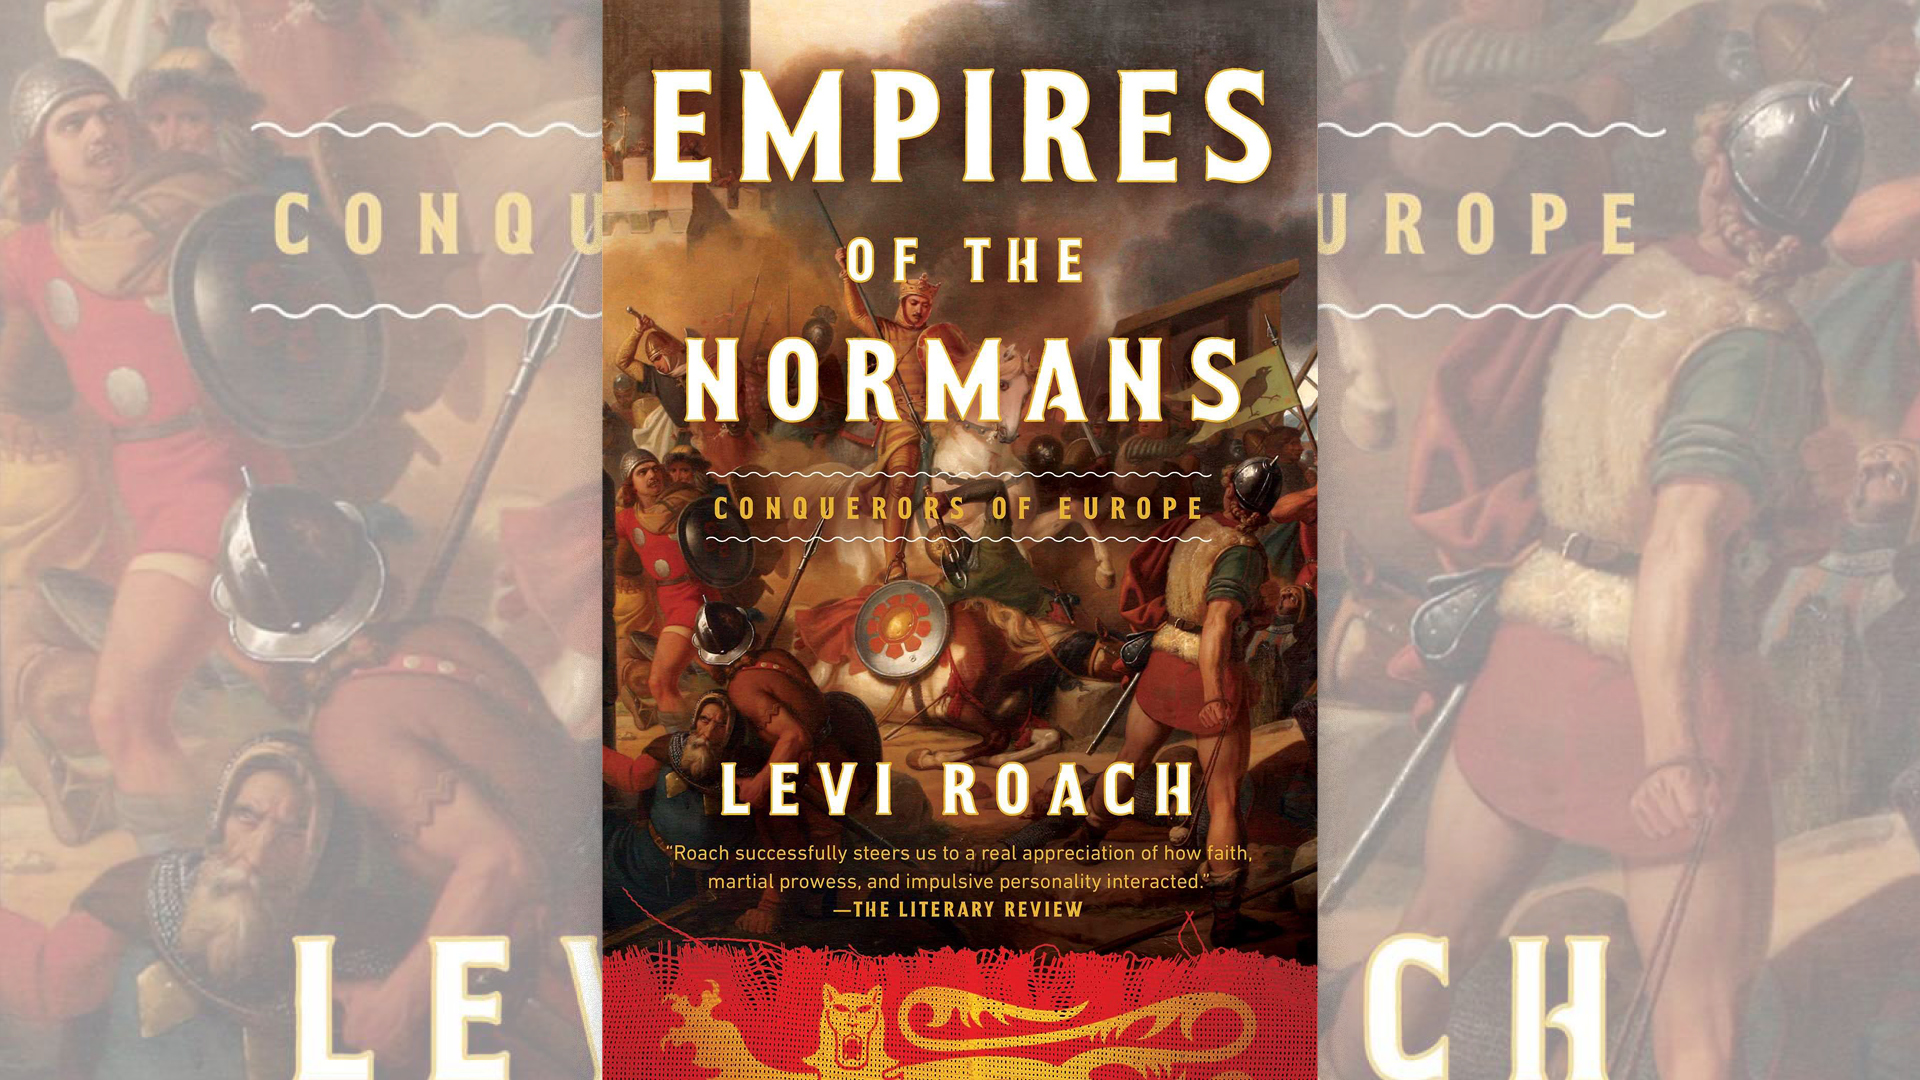 ‘Empires of the Normans’ Book Review: The Rest of the Story